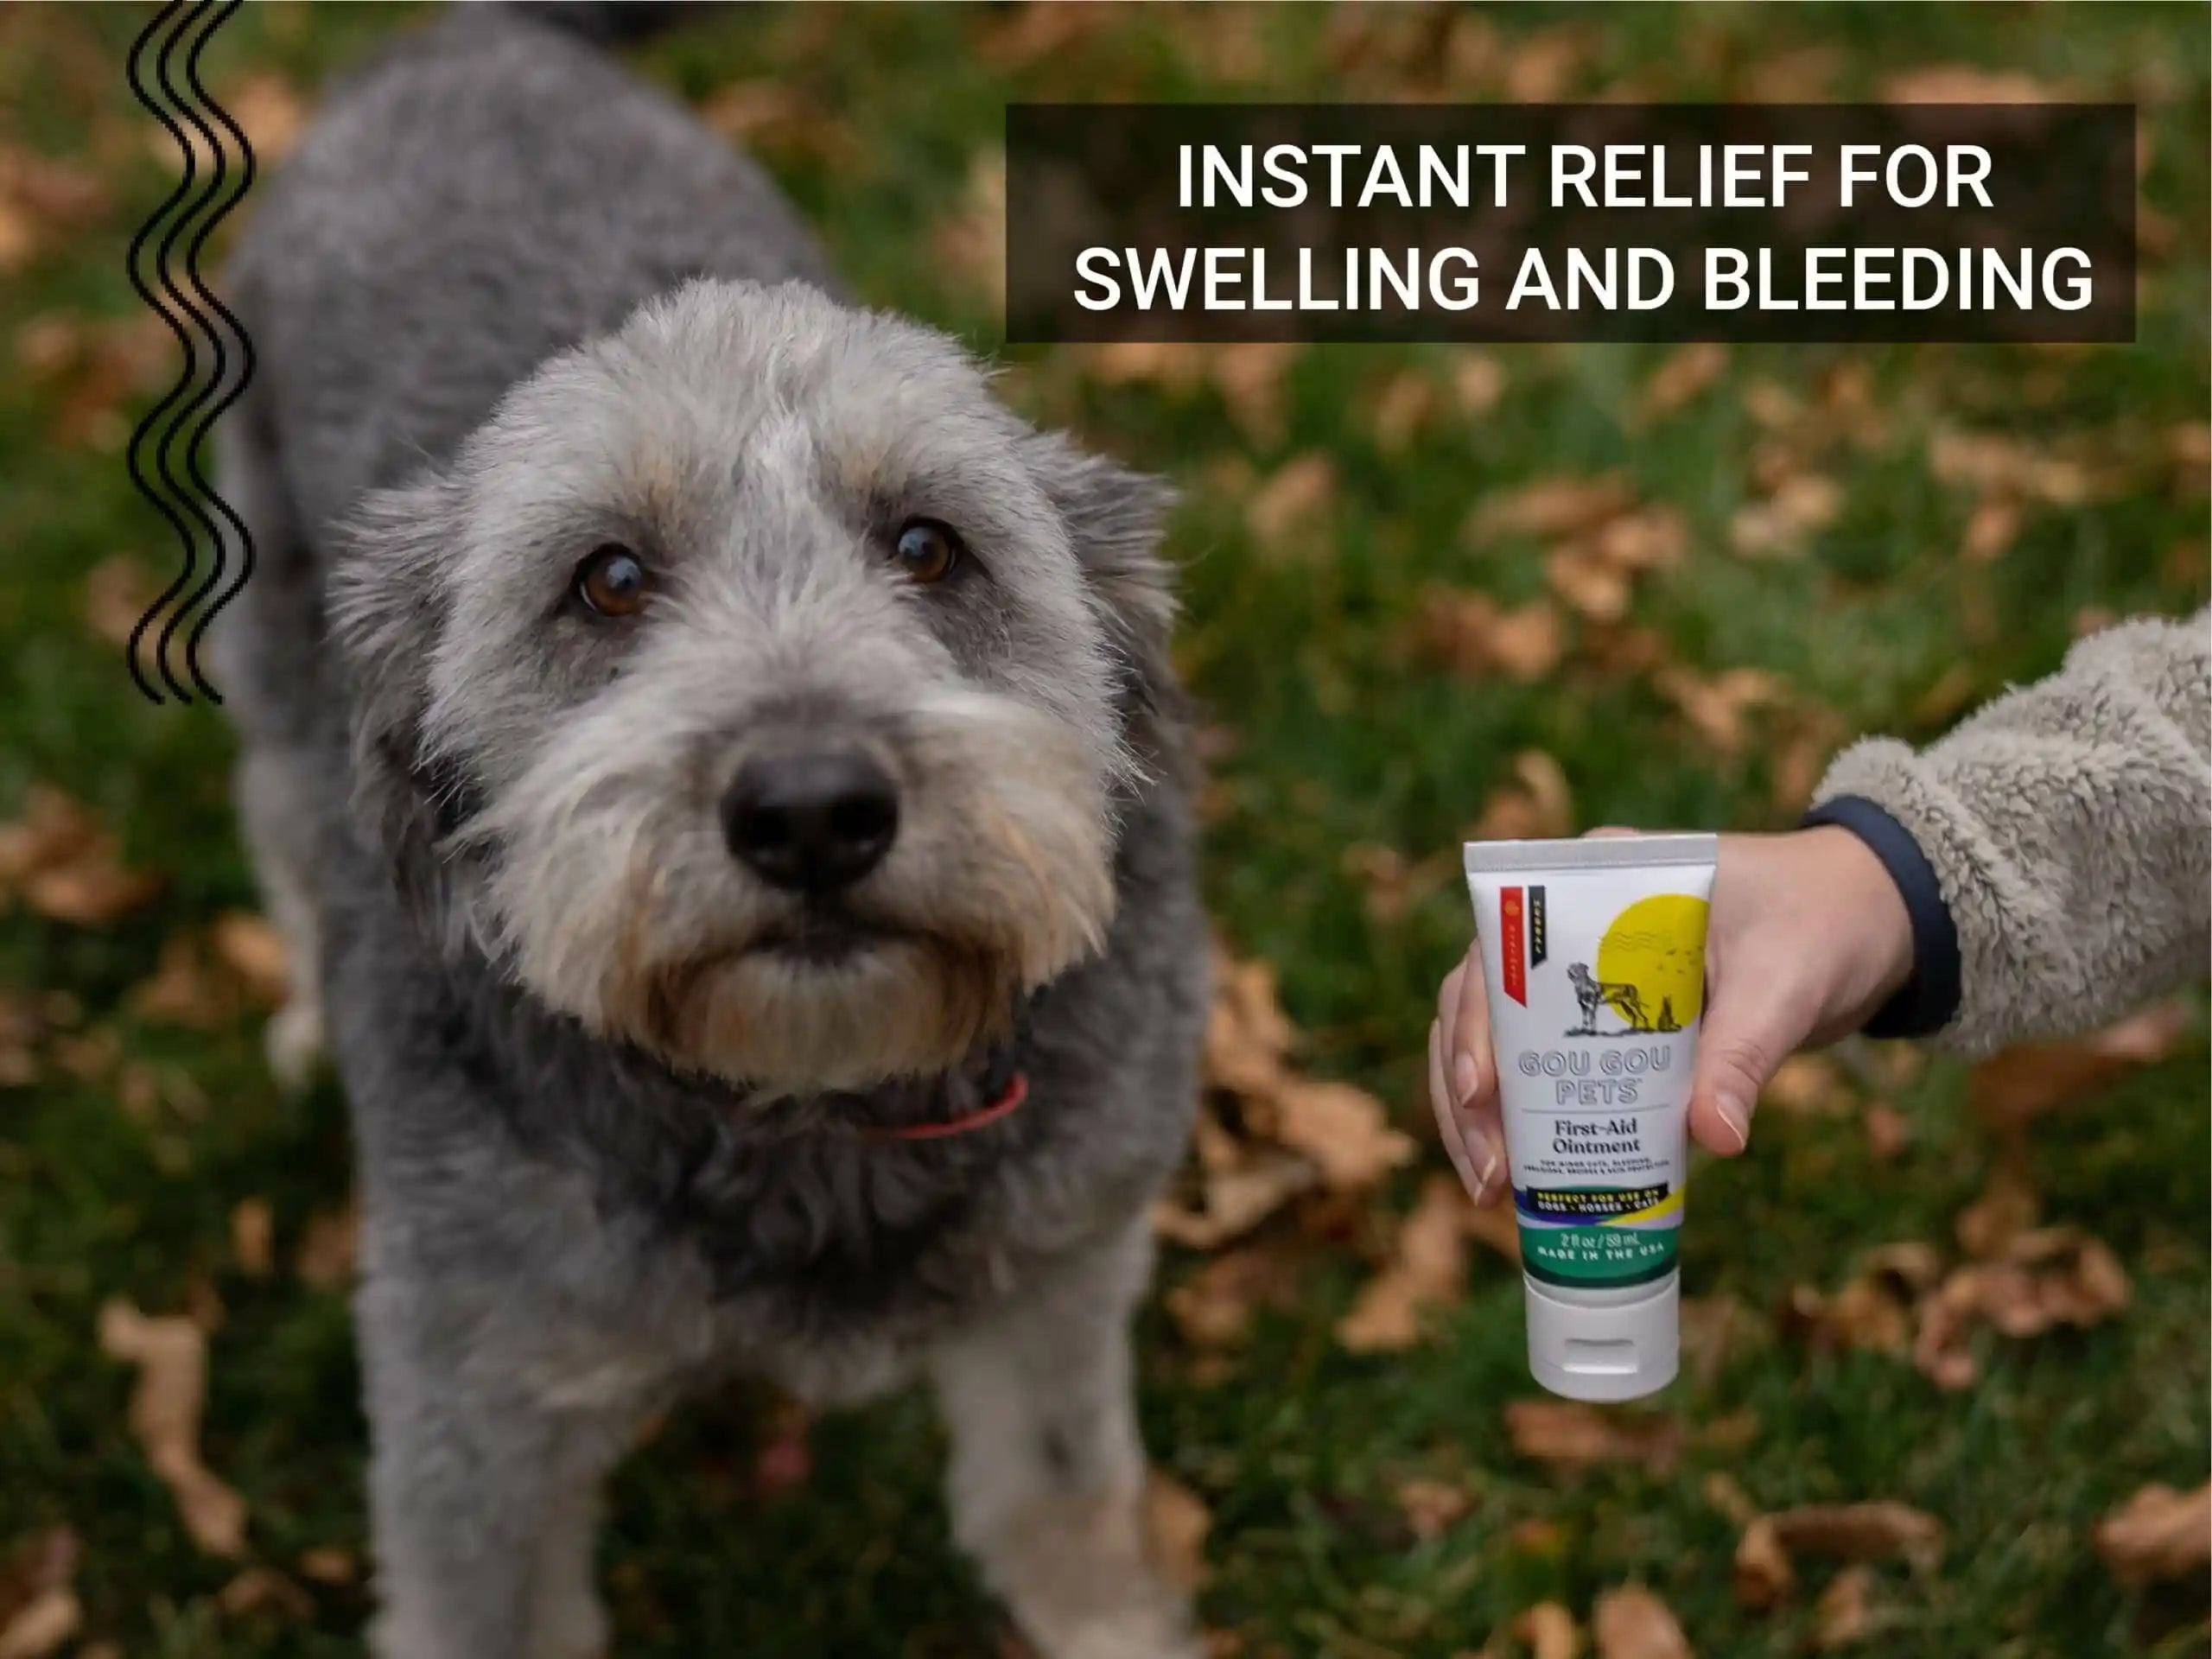 Gou Gou Pets First Aid Ointment for Dogs, Cats, and Horses